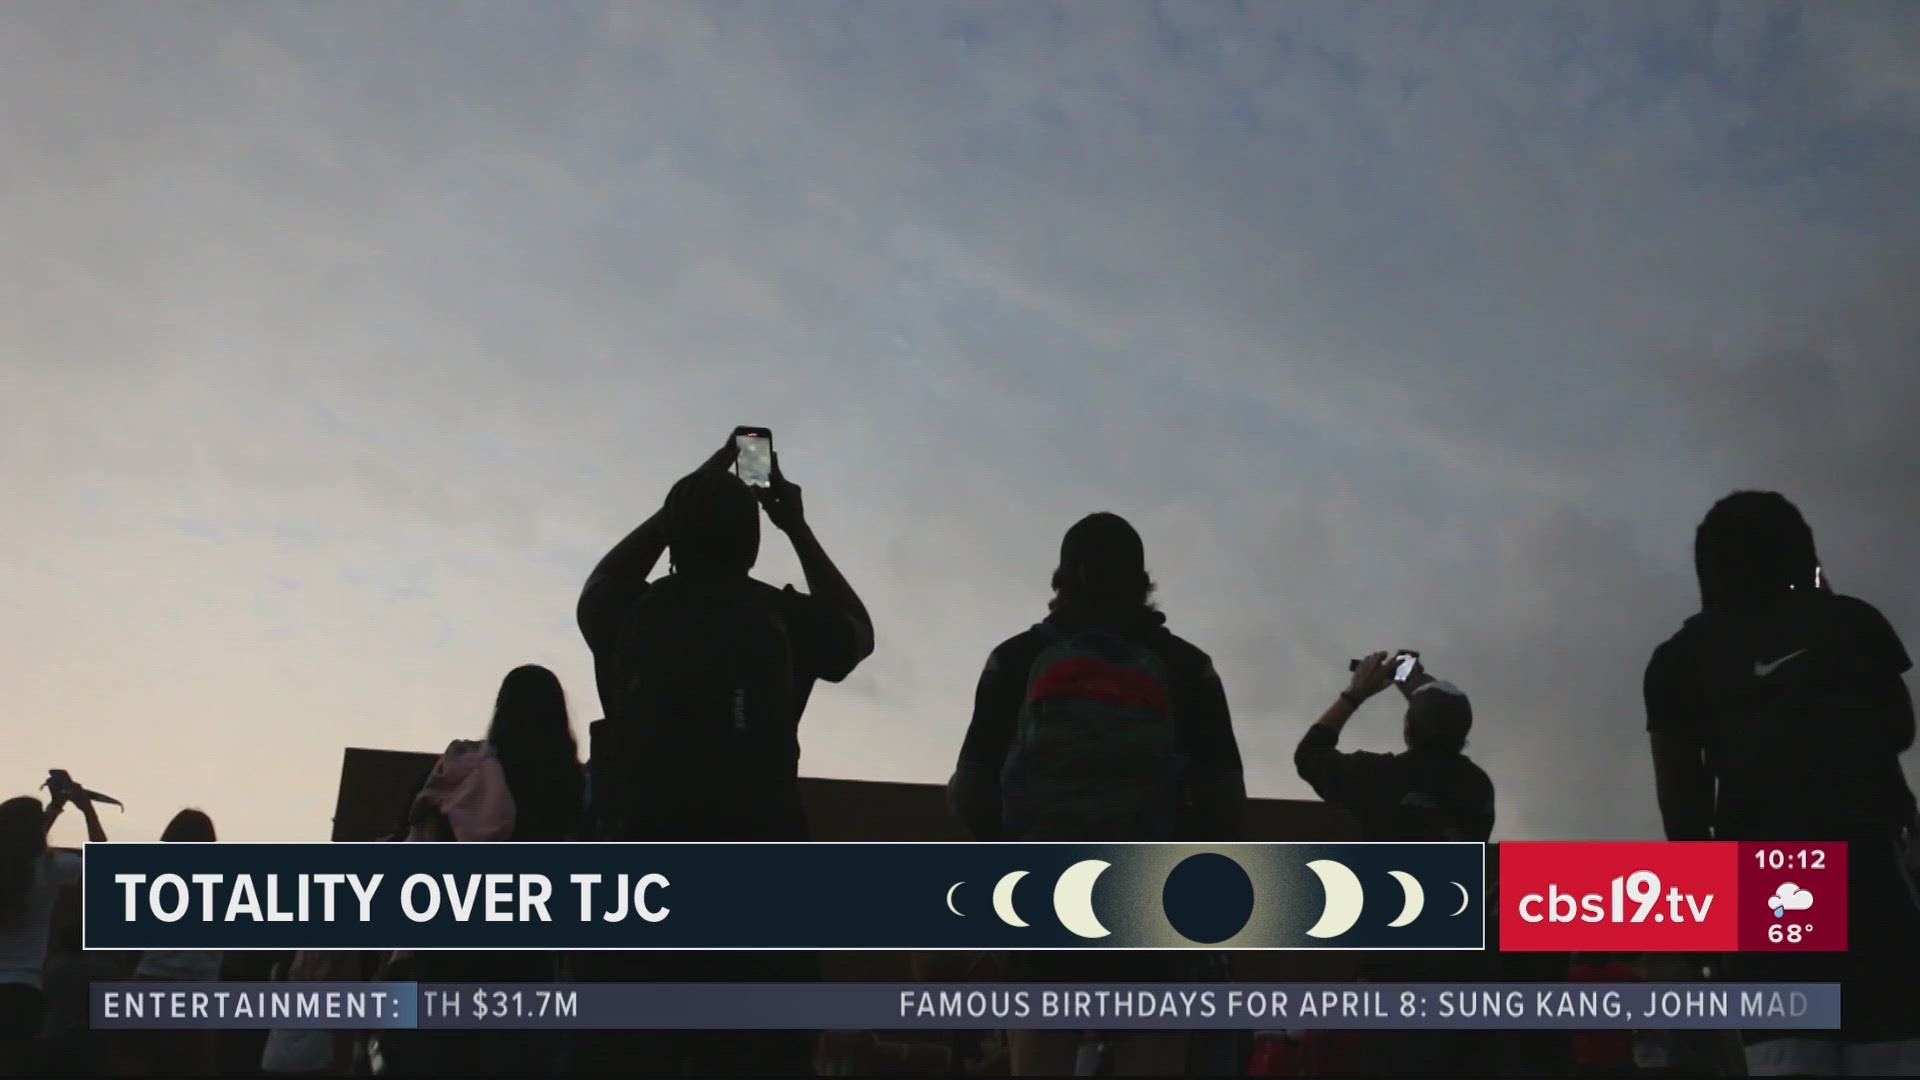 After months of preparation and anticipation, TJC hots their "Eclipse at TJC" event